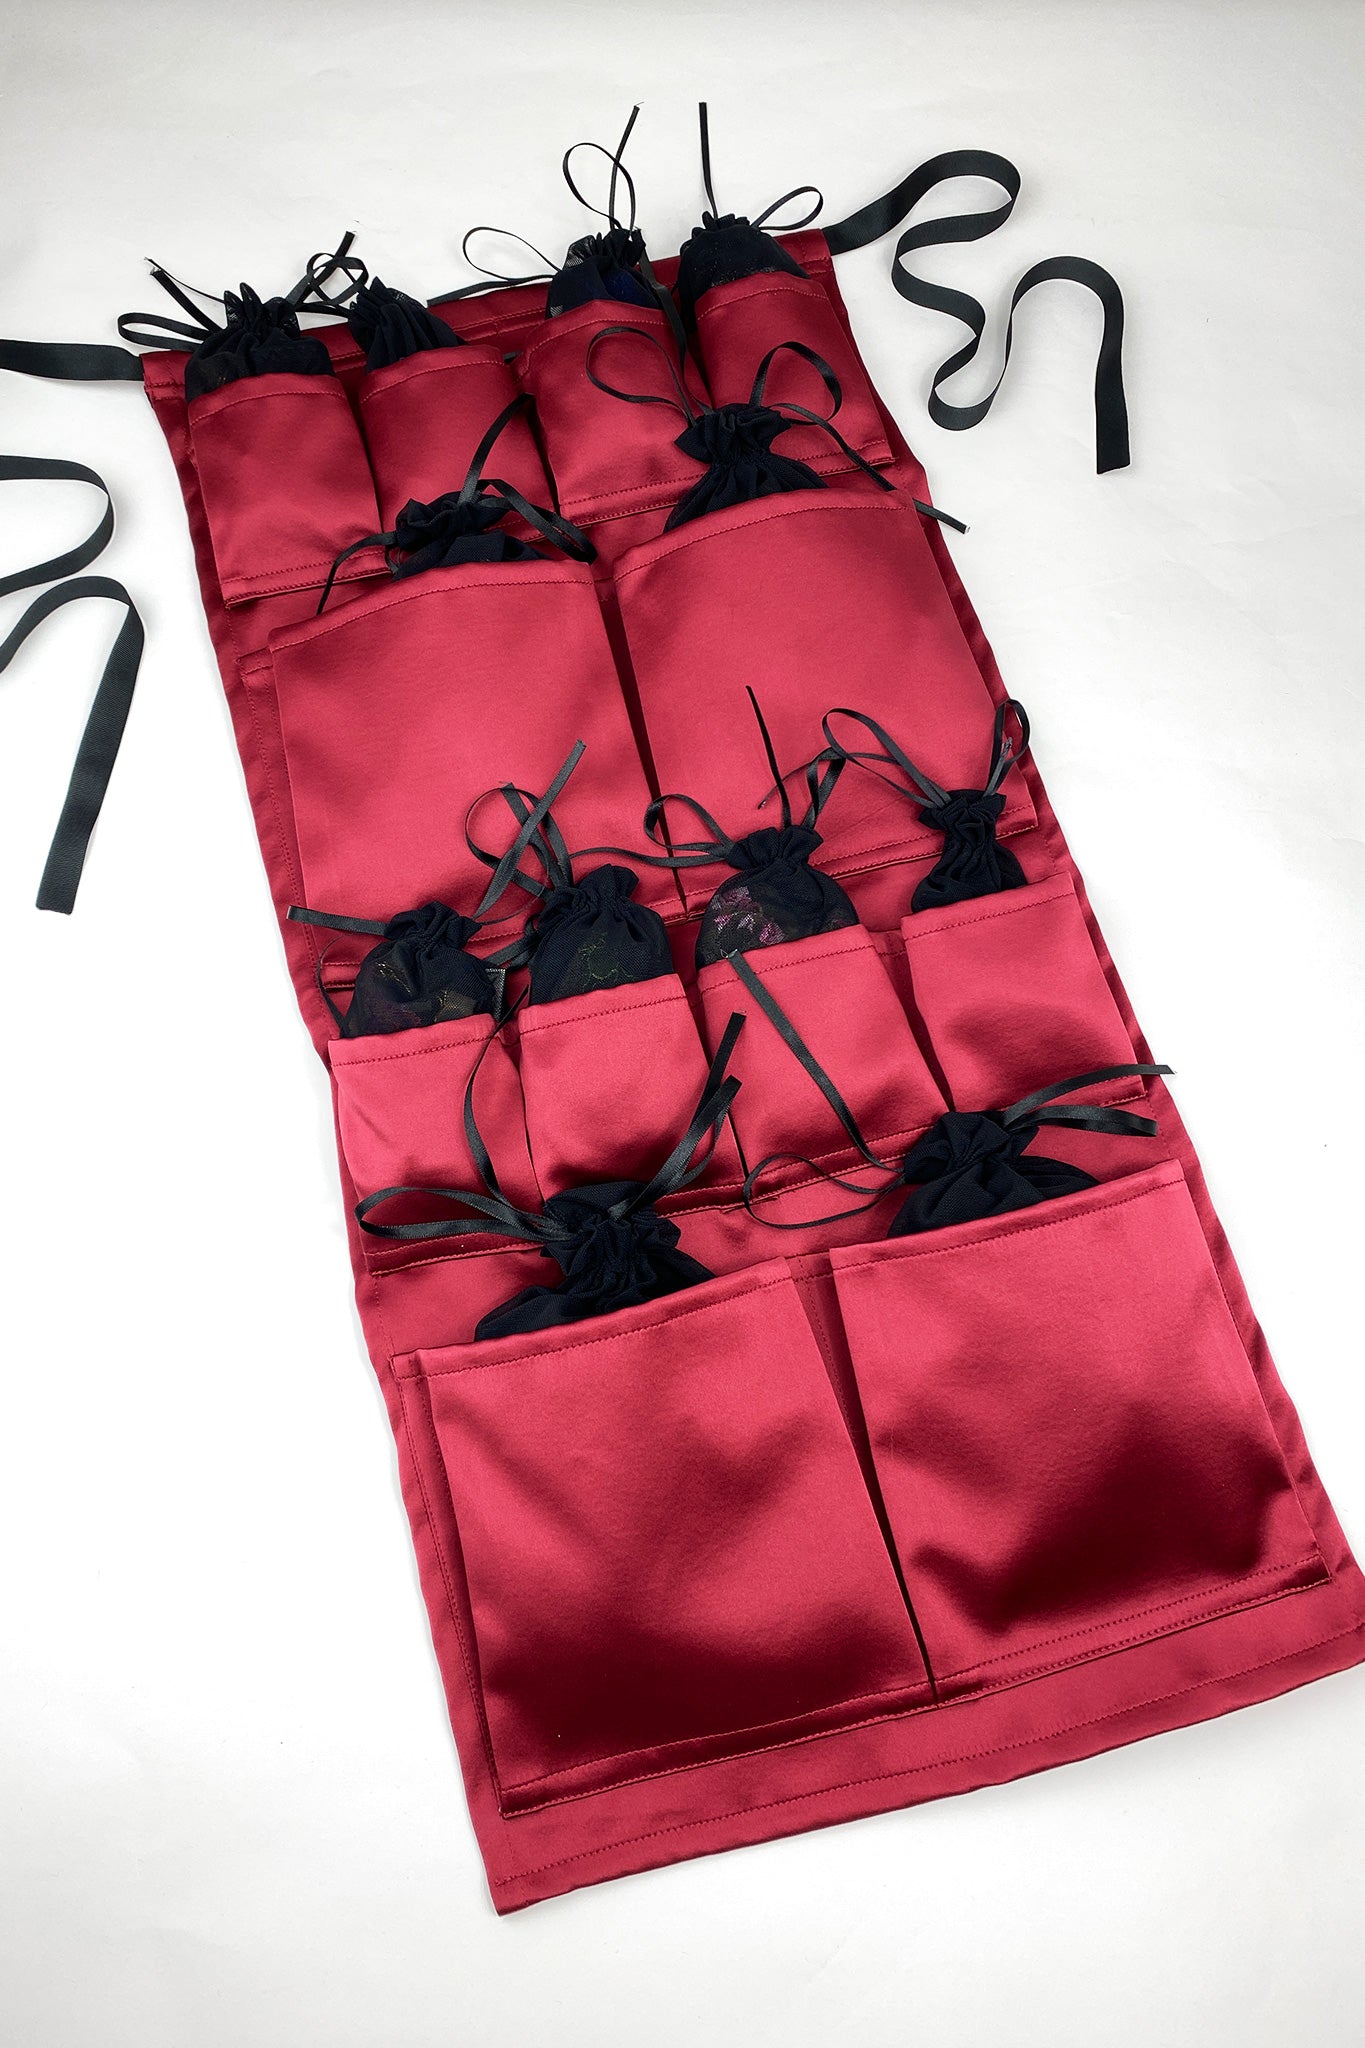 Win £30 Beautifully Undressed Lingerie Voucher (12 Days of Xmas